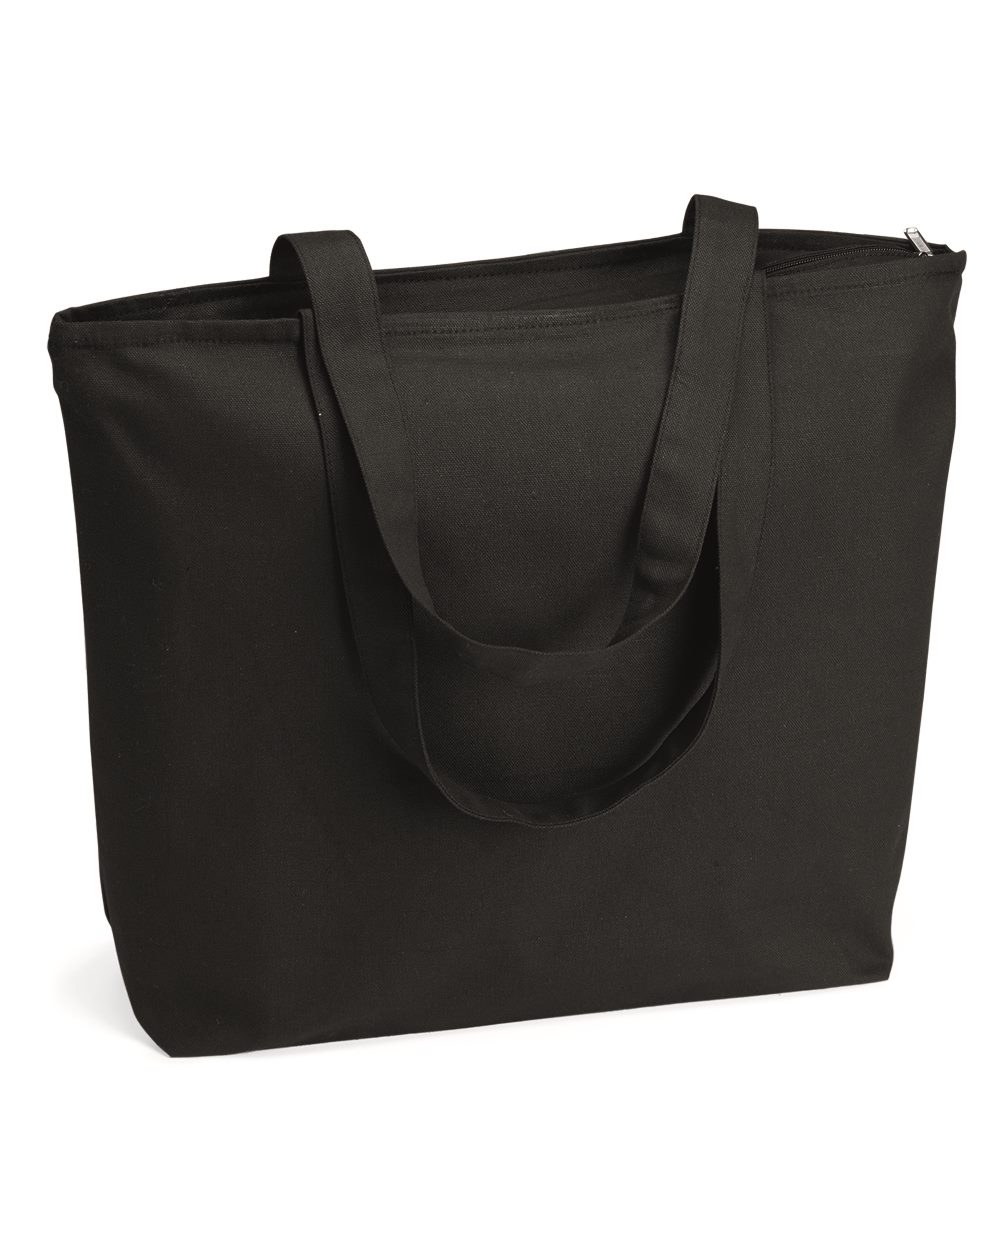 The Law Office of Allen Cooper (LARGE TOTE)